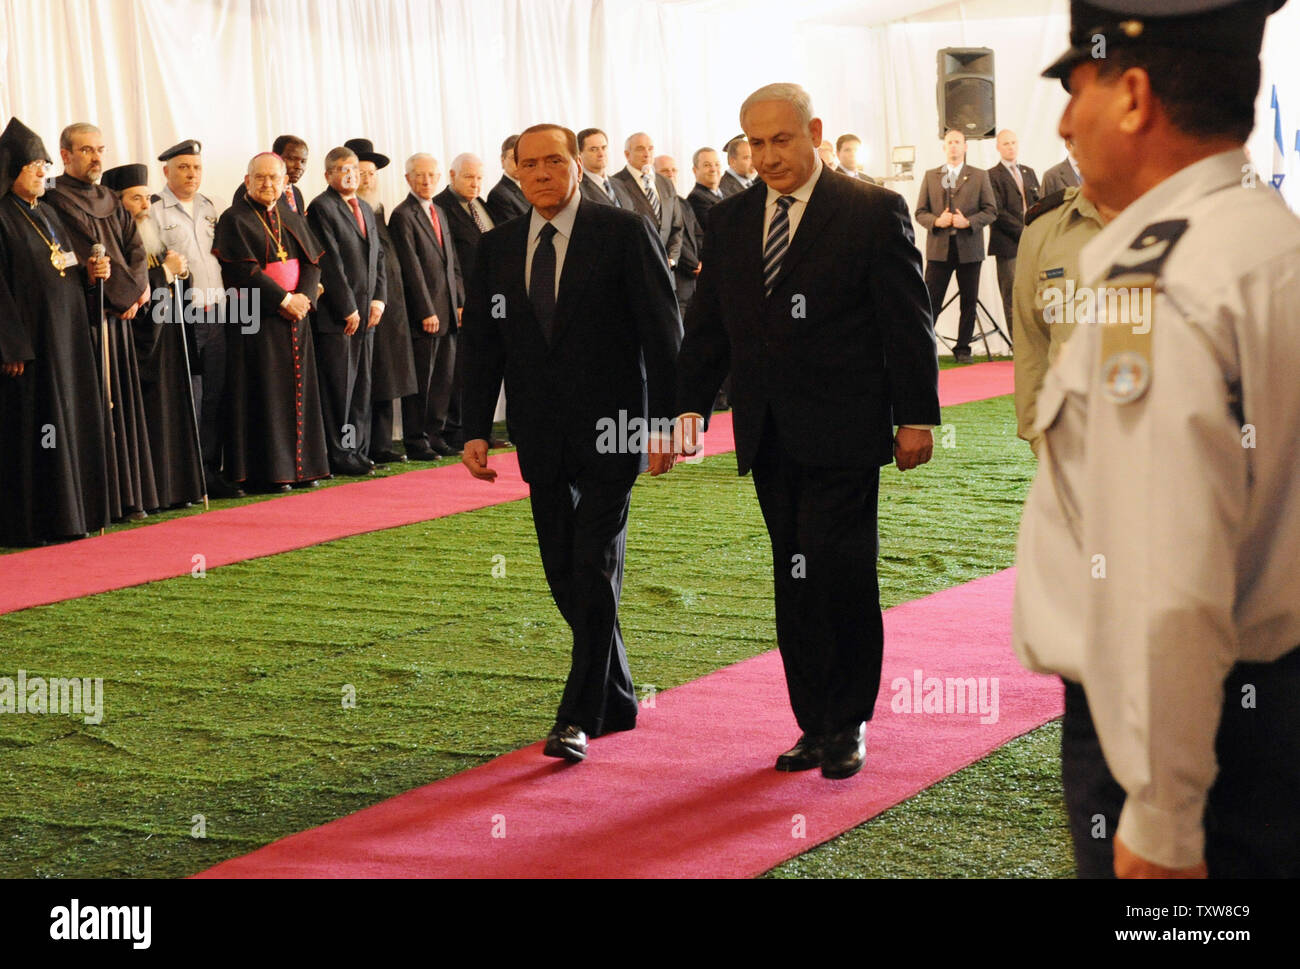 L-R:  Italian Prime Minister Silvio Berlusconi and Israeli Prime Minister Benjamin Netanyahu walk on the red carpet at a welcoming ceremony at Netanyahu's Jerusalem office, February 1, 2010. Prime Minister Berlusconi is in Israel for a three- day visit.   UPI/Debbie Hill Stock Photo